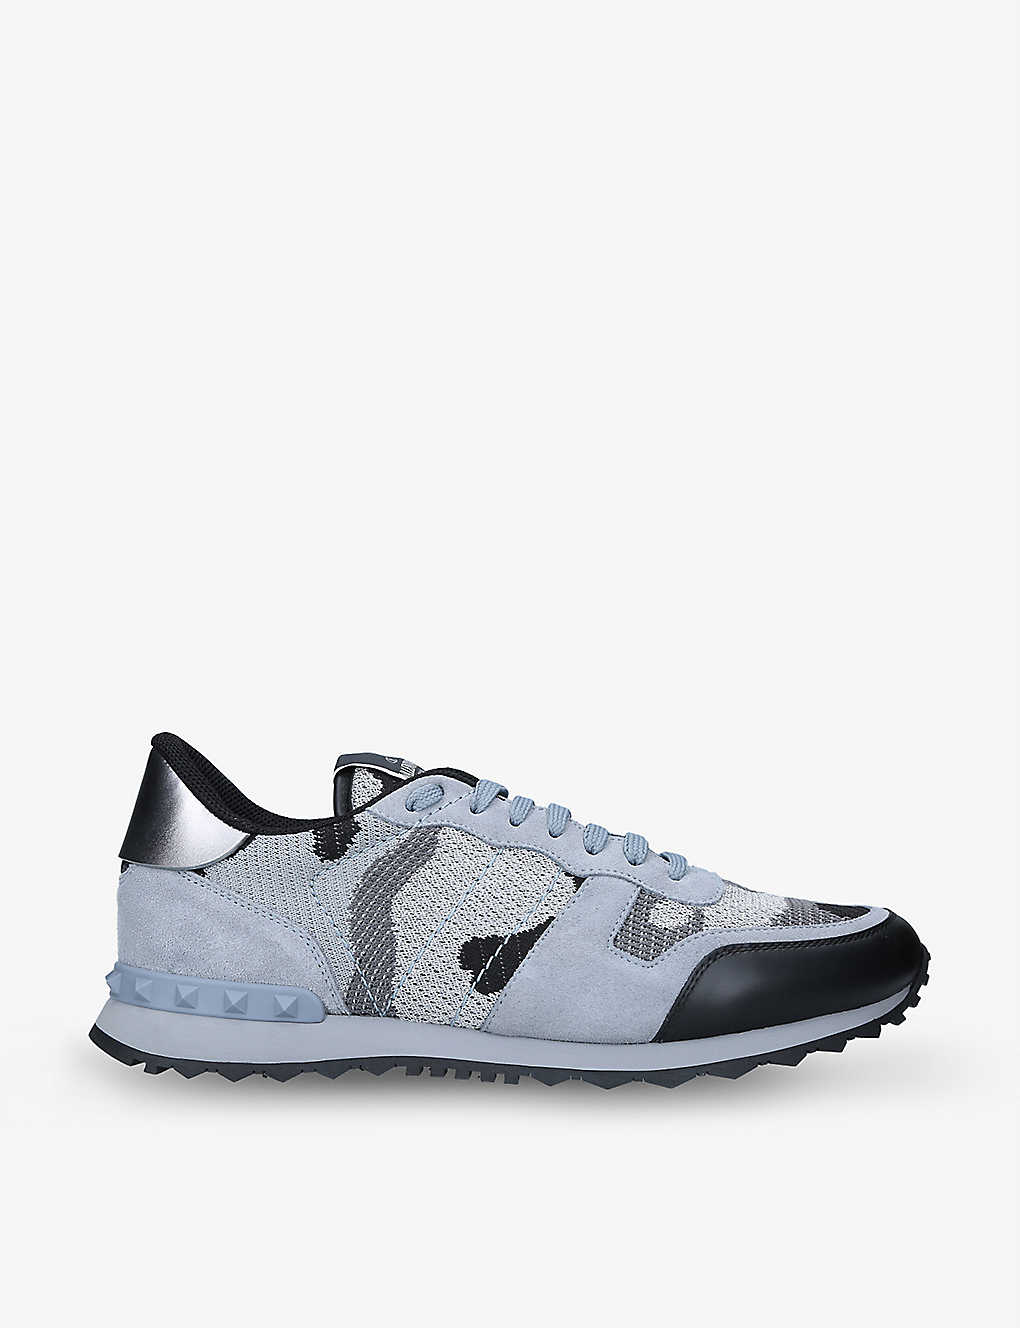 Valentino Garavani Rockrunner Camouflage-pattern Mesh And Leather Low-top Trainers In Grey/light